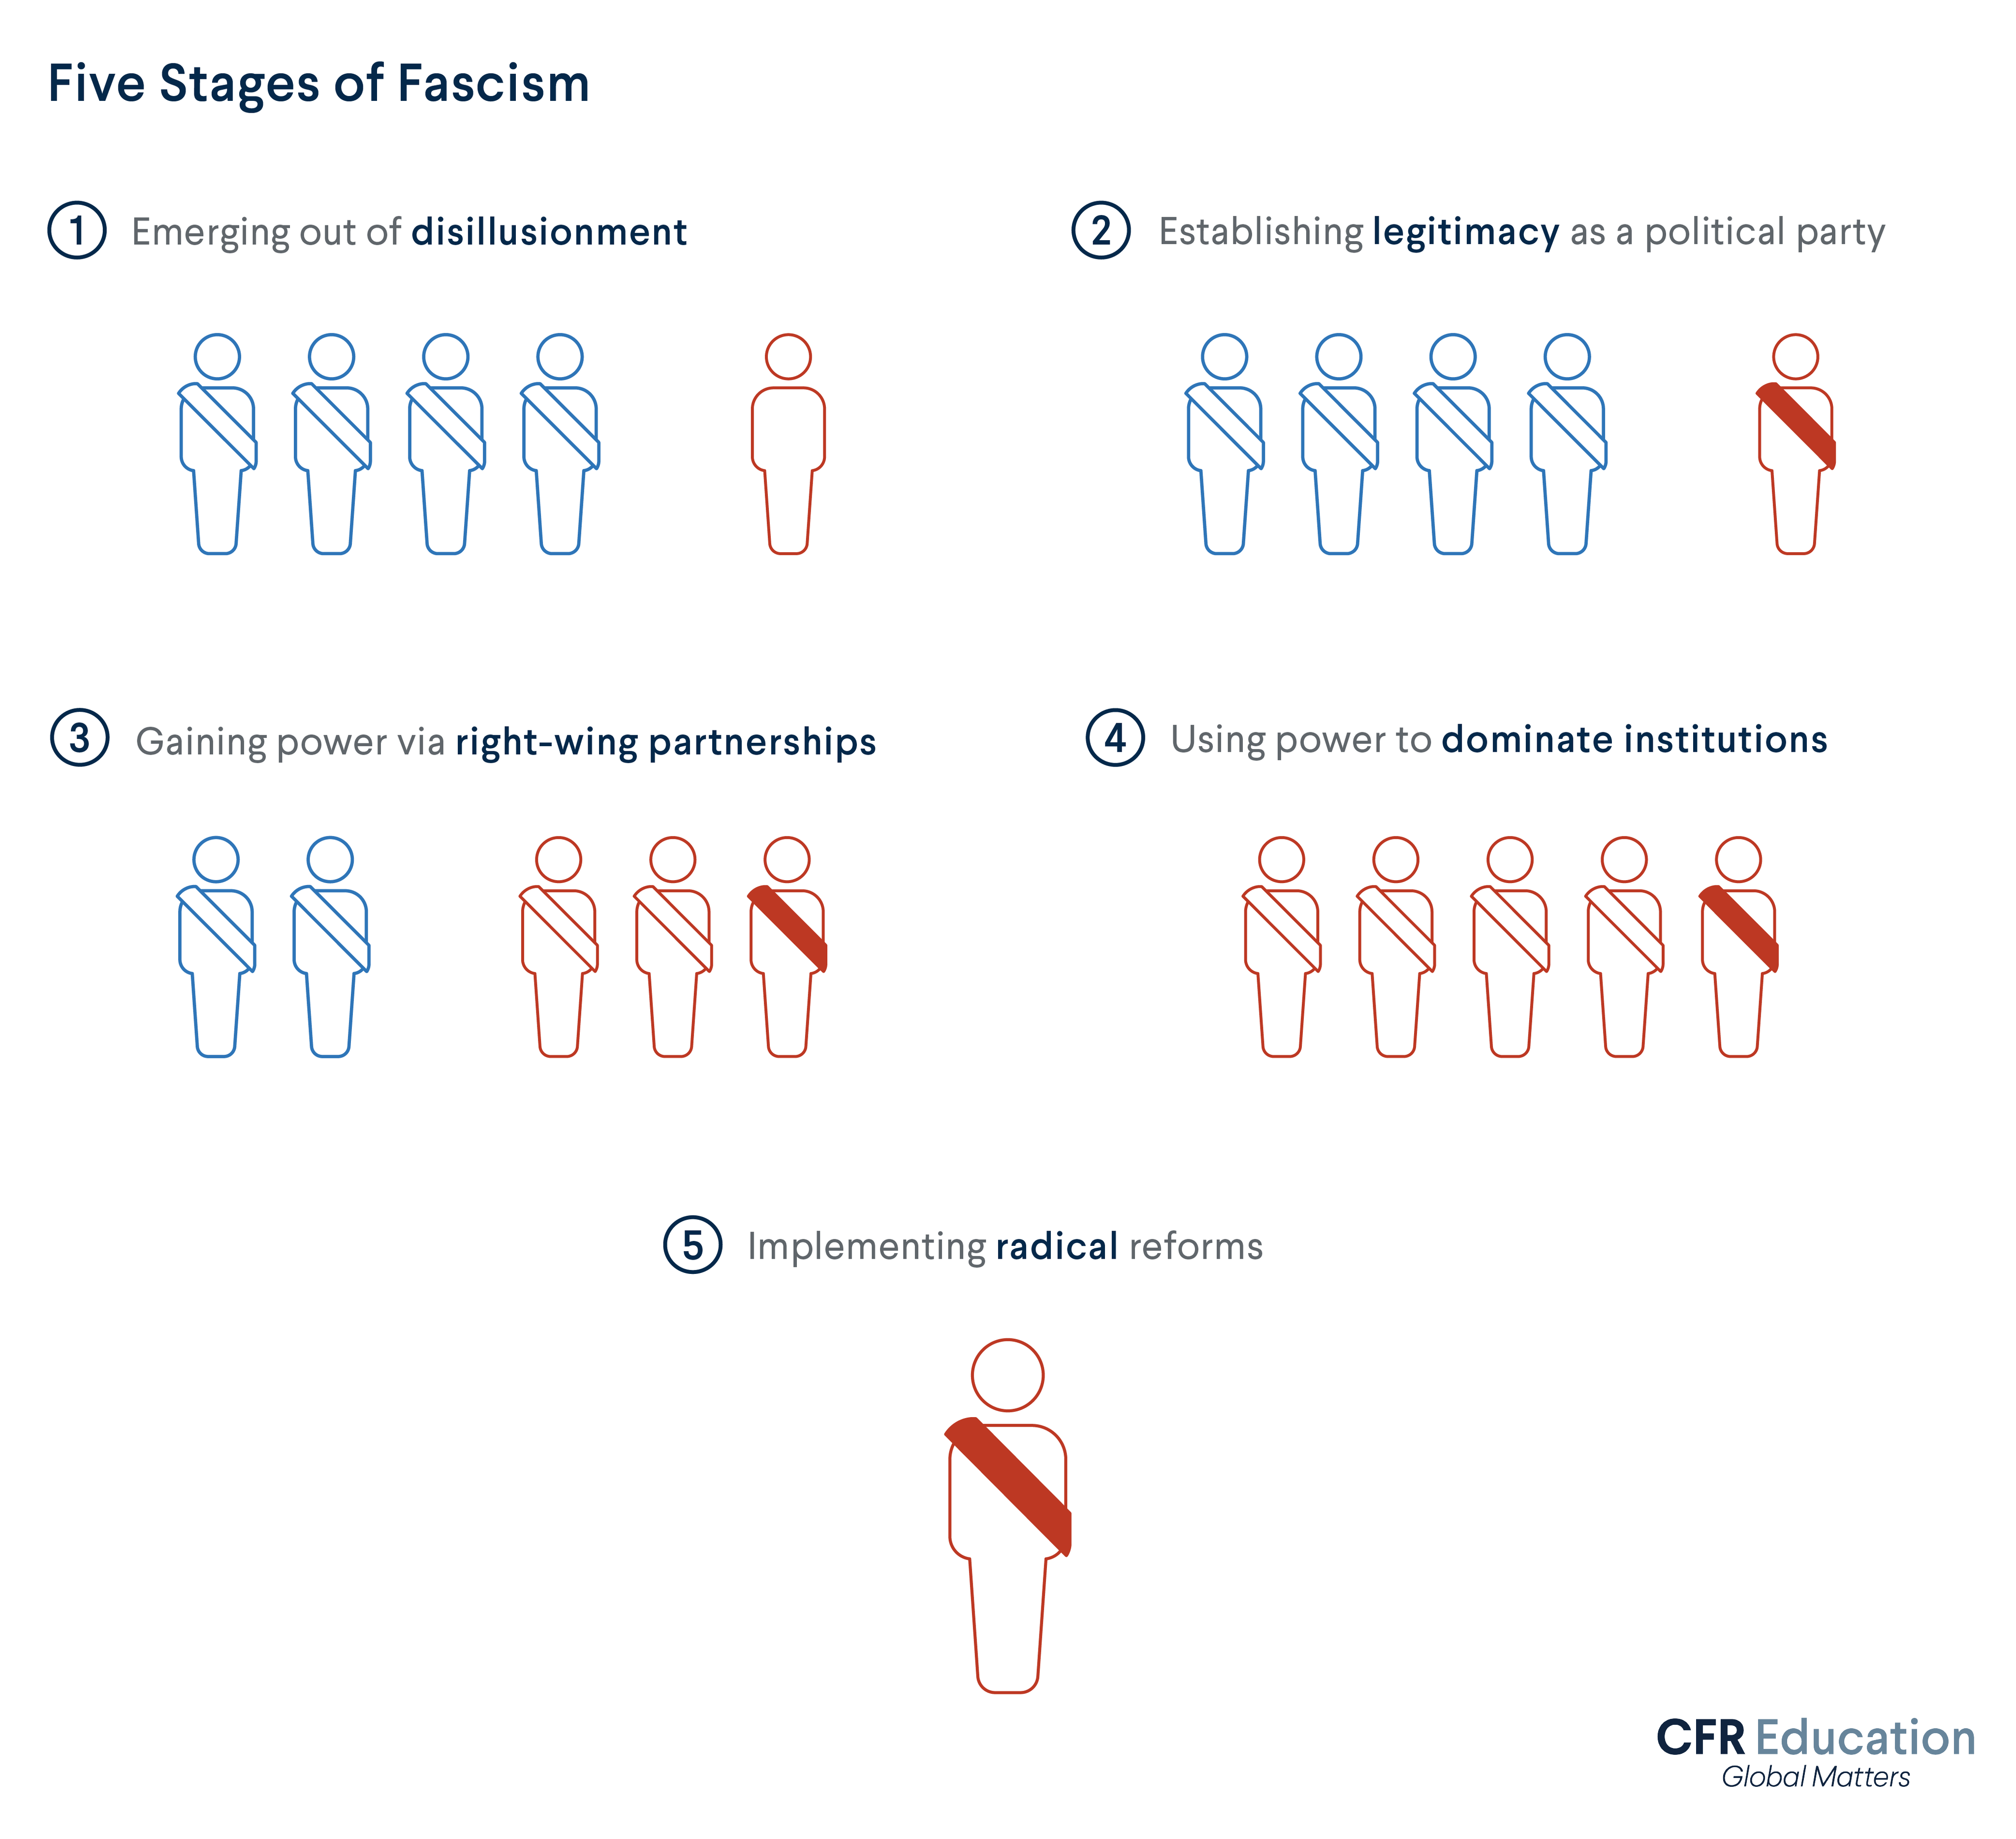 Five Stages of Fascism: 1. Emerging out of disillusionment, 2. Establishing political legitimacy, 3. gaining political power, 4. Dominating Institutions, 5. Radical reforms. For more info contact us at cfr_education@cfr.org.